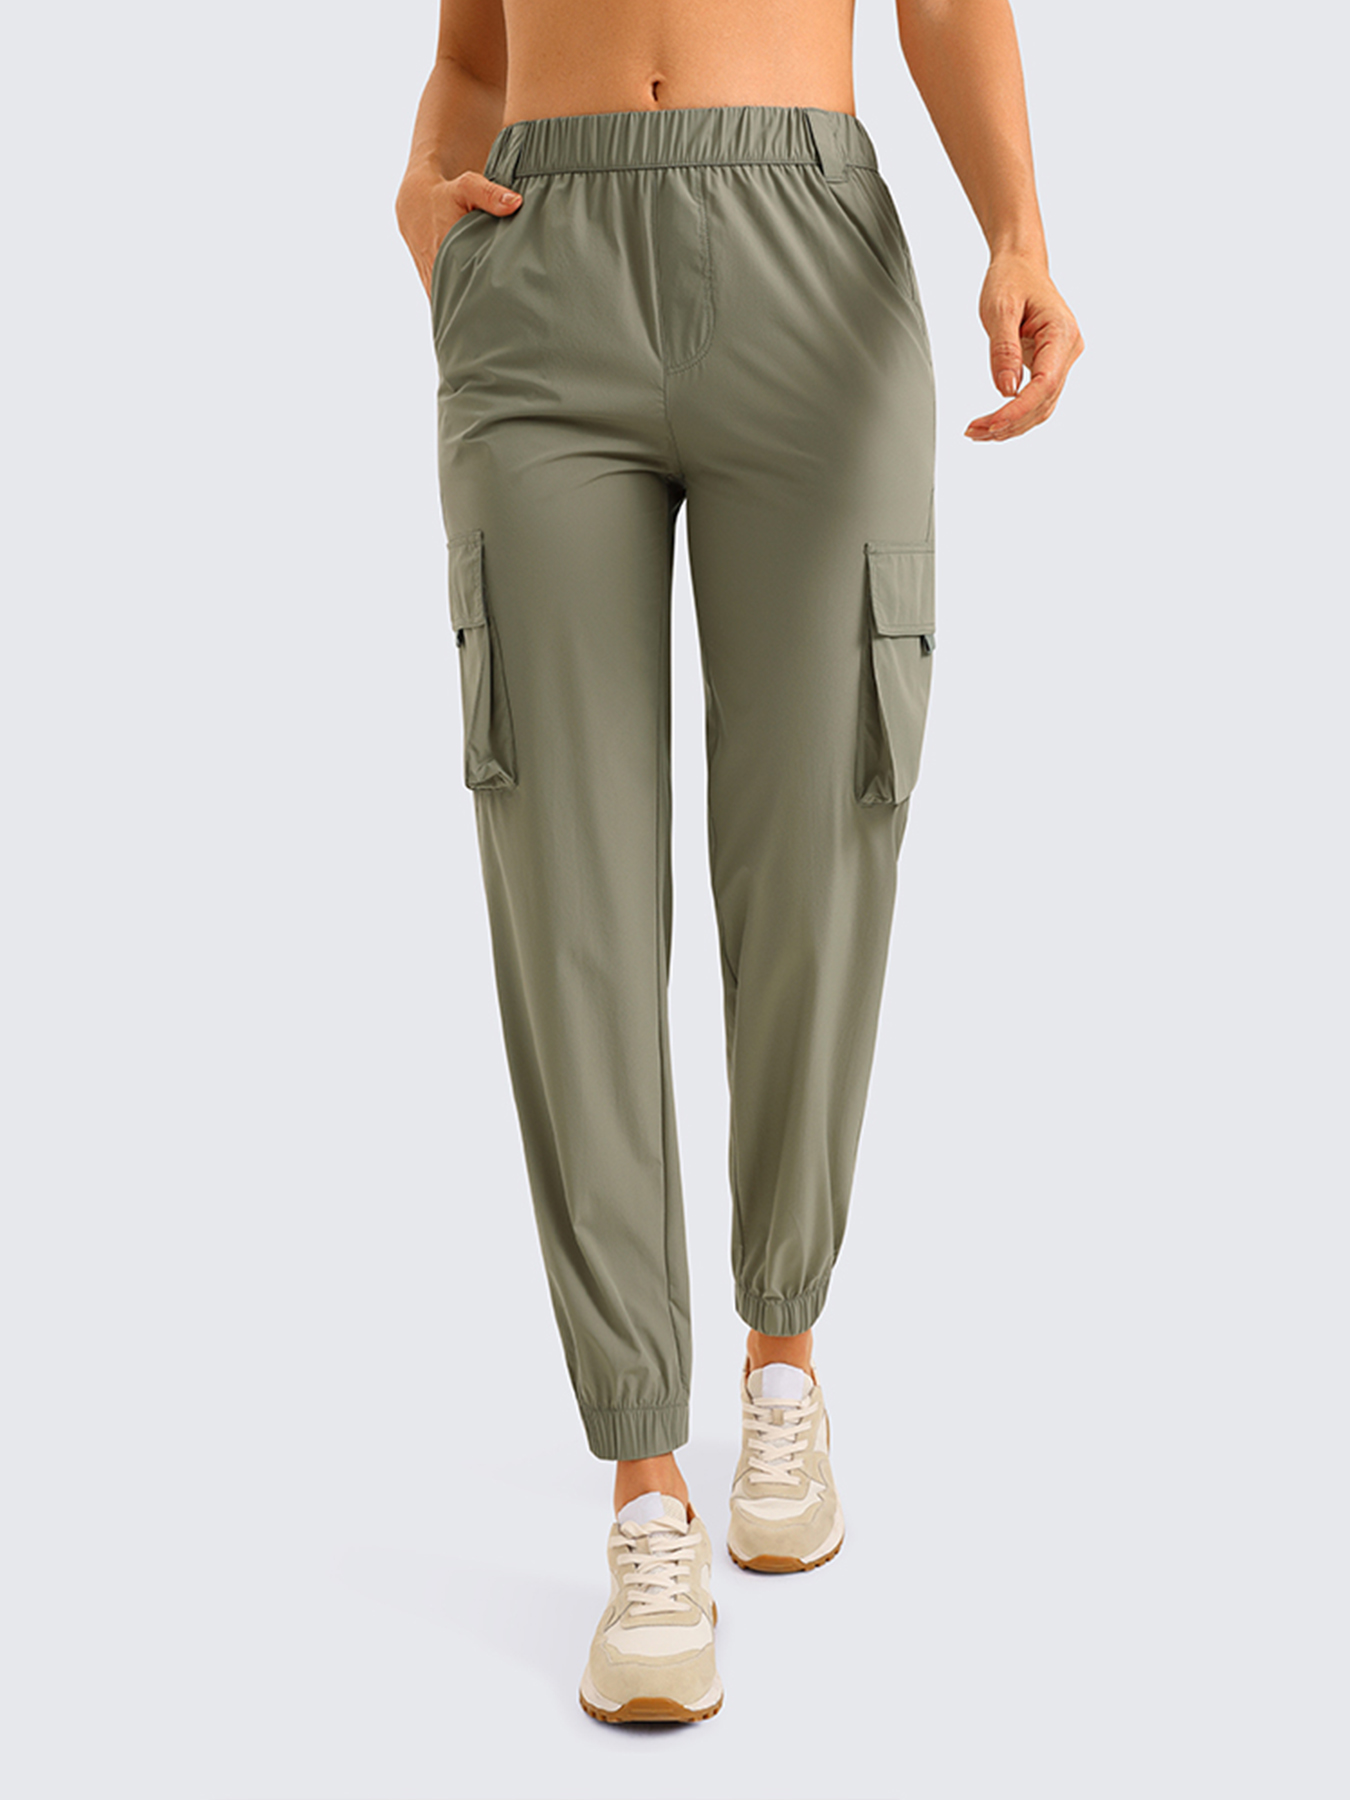 All In Motion Women's Stretch Woven Cargo Joggers